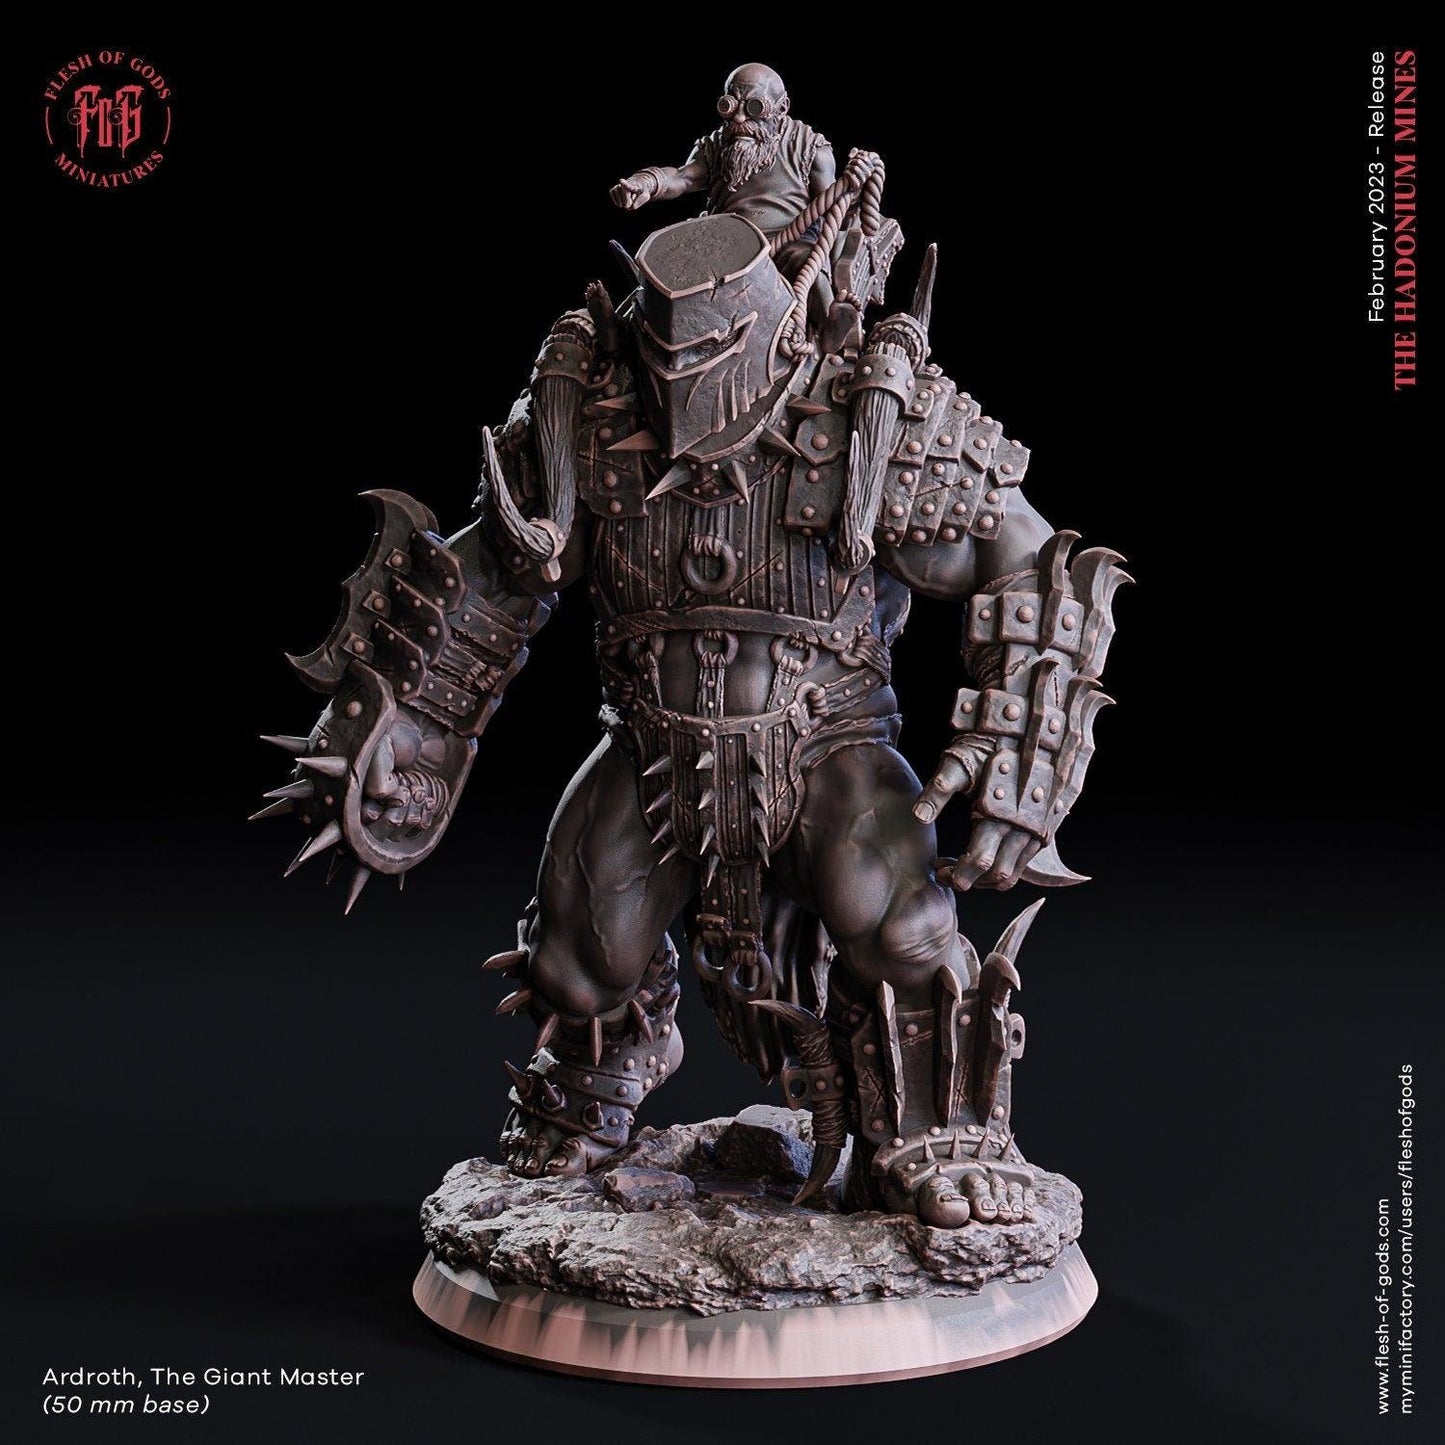 Ardroth, the Giant Master Miniature | Armored Troll, Giant Miniature for Wargaming | 50mm Base - Plague Miniatures shop for DnD Miniatures